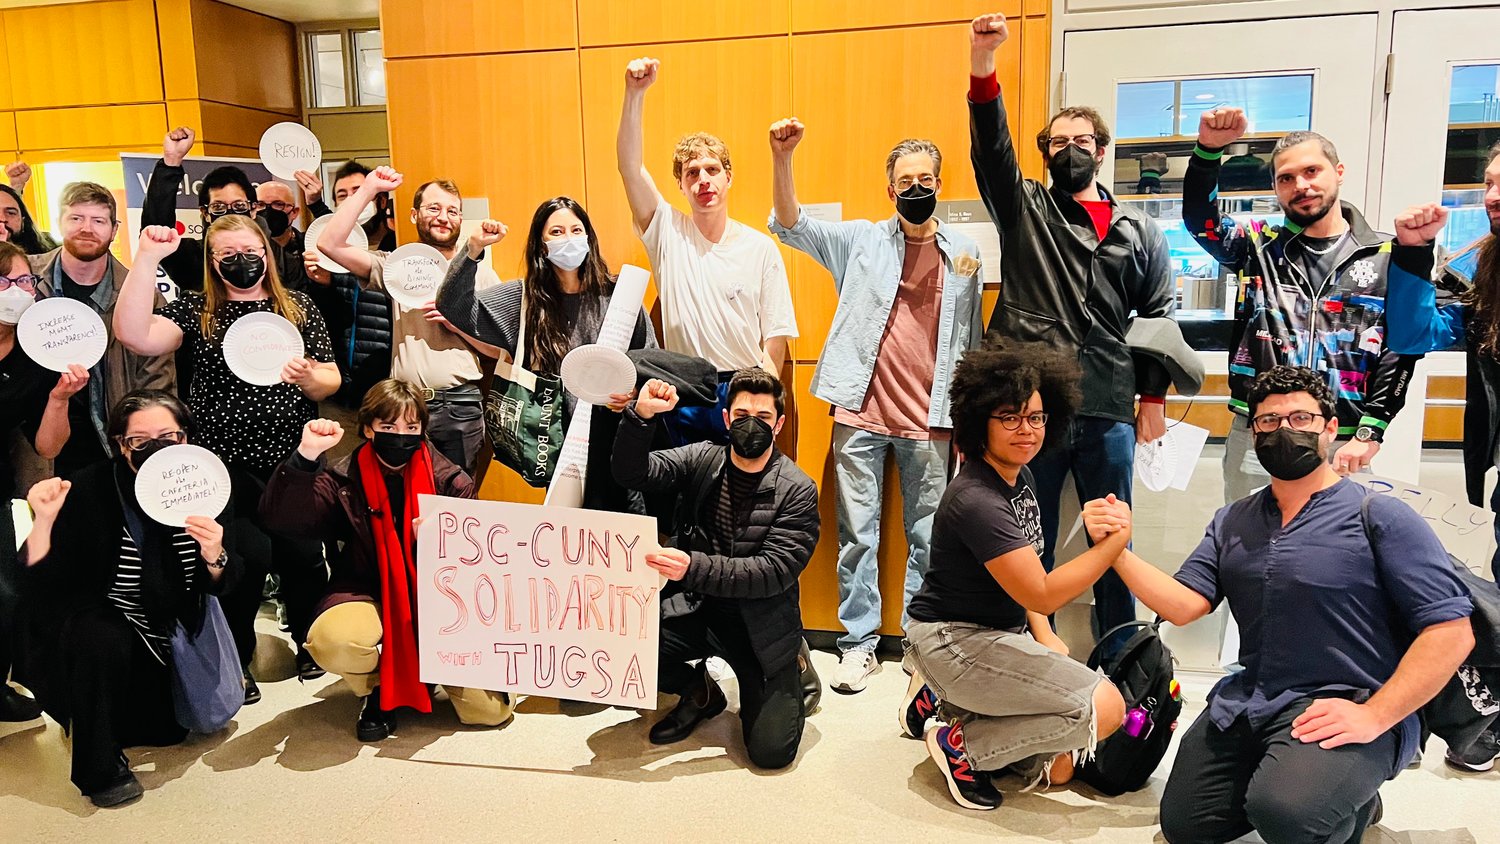 Students and workers at CUNY Graduate Center on Fifth Avenue have reclaimed space that had been privatized by the university. A “People’s Pantry” has taken shape there and with it a collaborative activist vision.